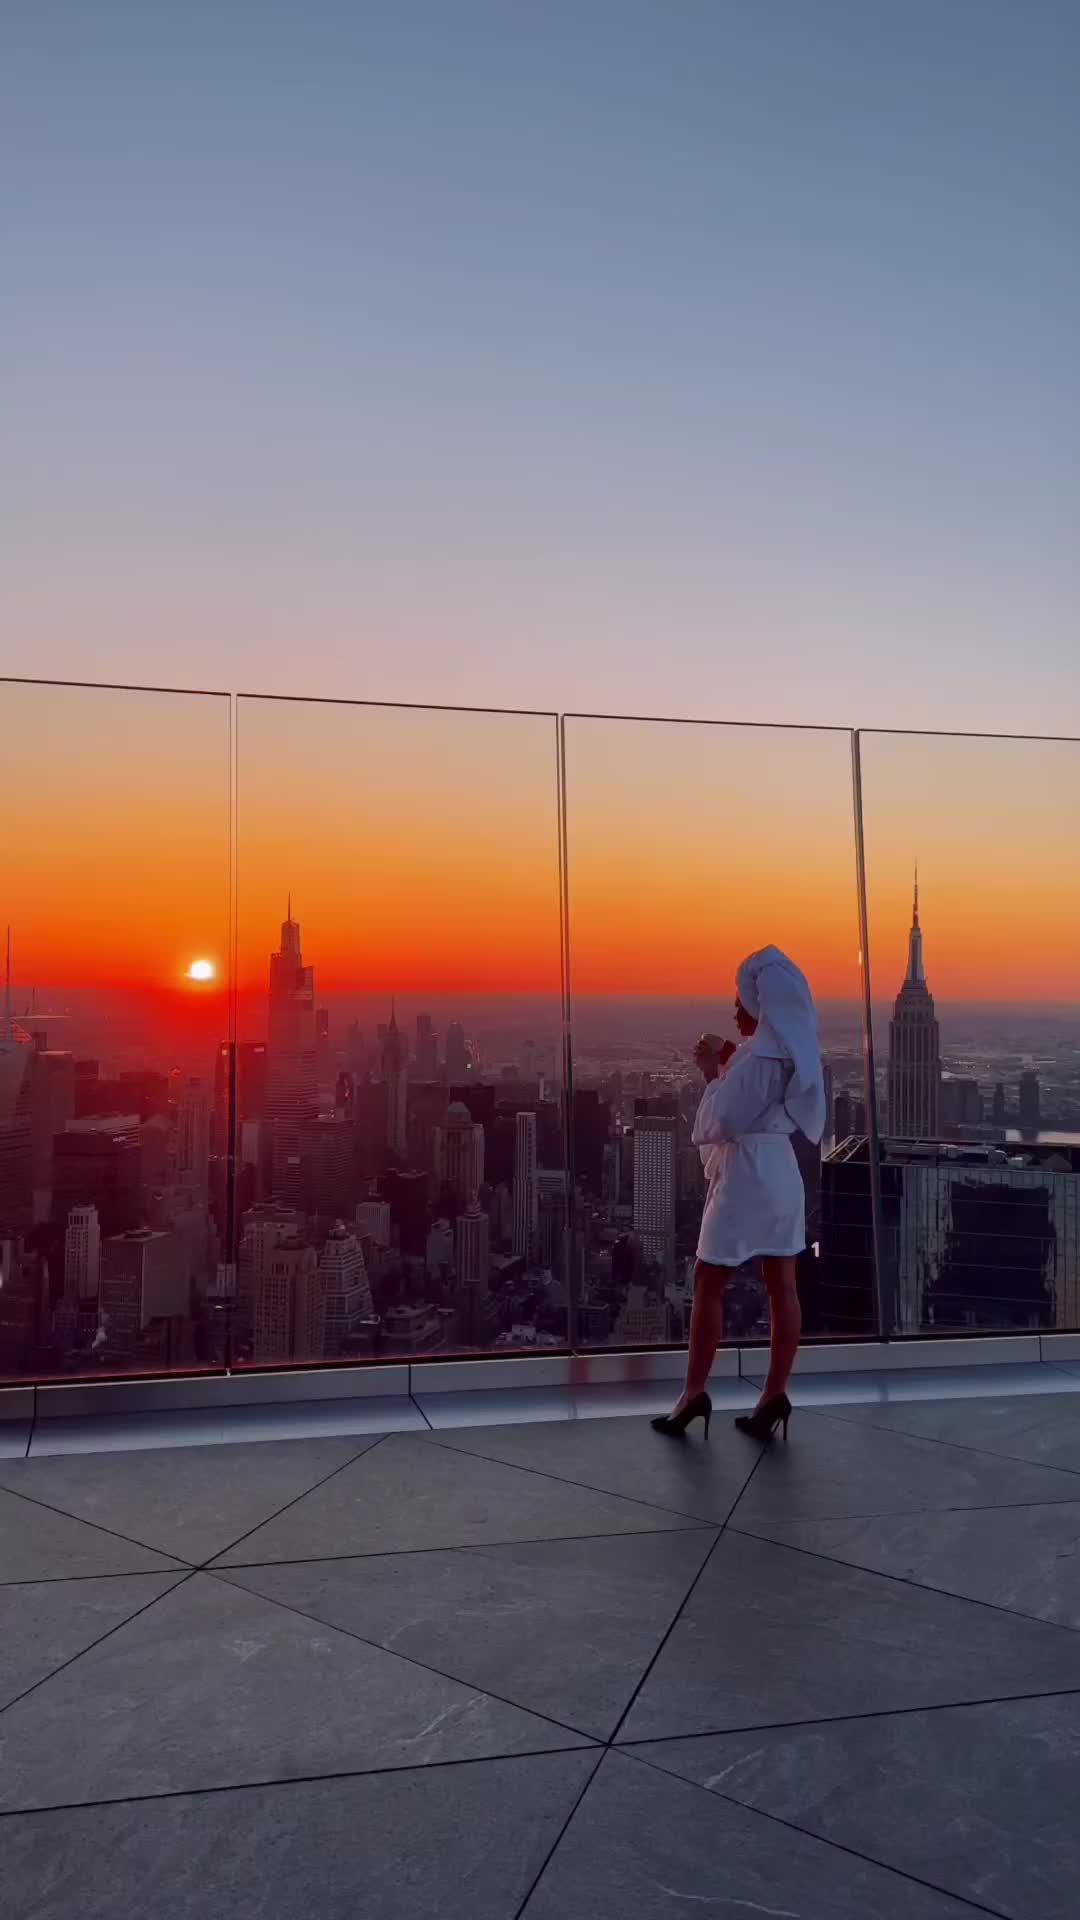 Magical Sunrise from The Edge, NYC’s 100th Floor 🌇